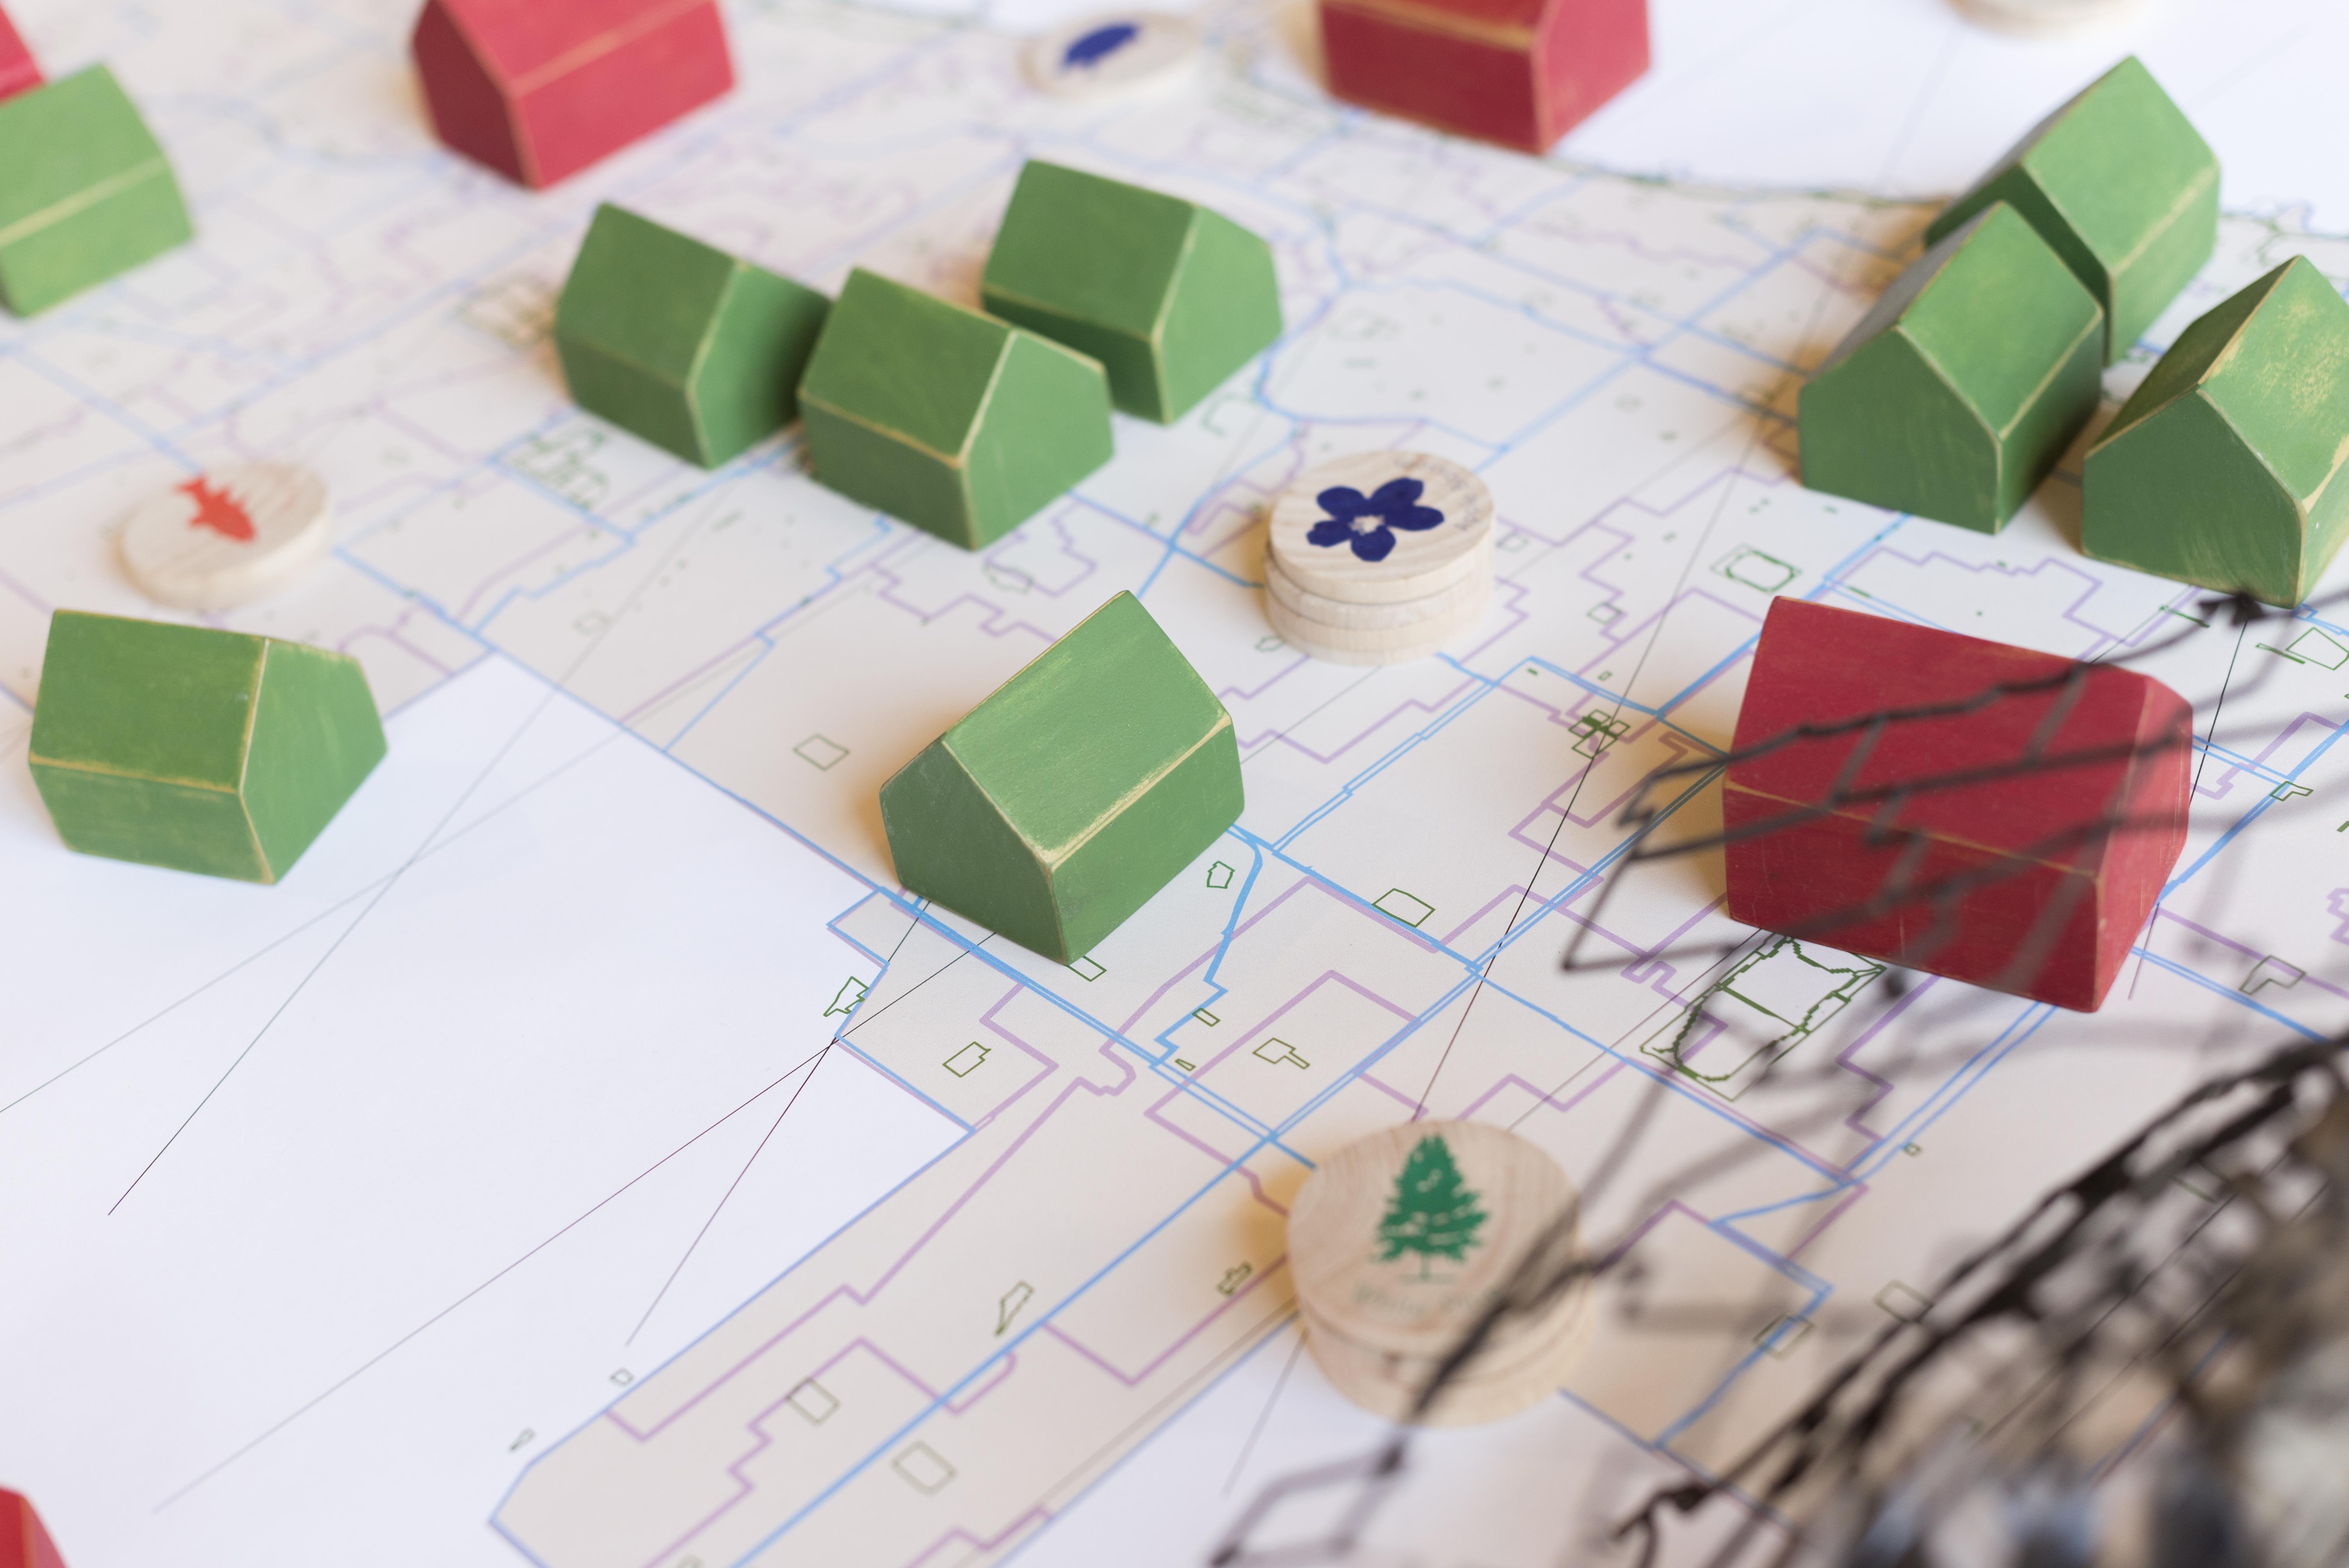 Groupings of small wooden tokens shaped like houses in red and green lay on top of a table with a maplike grid.